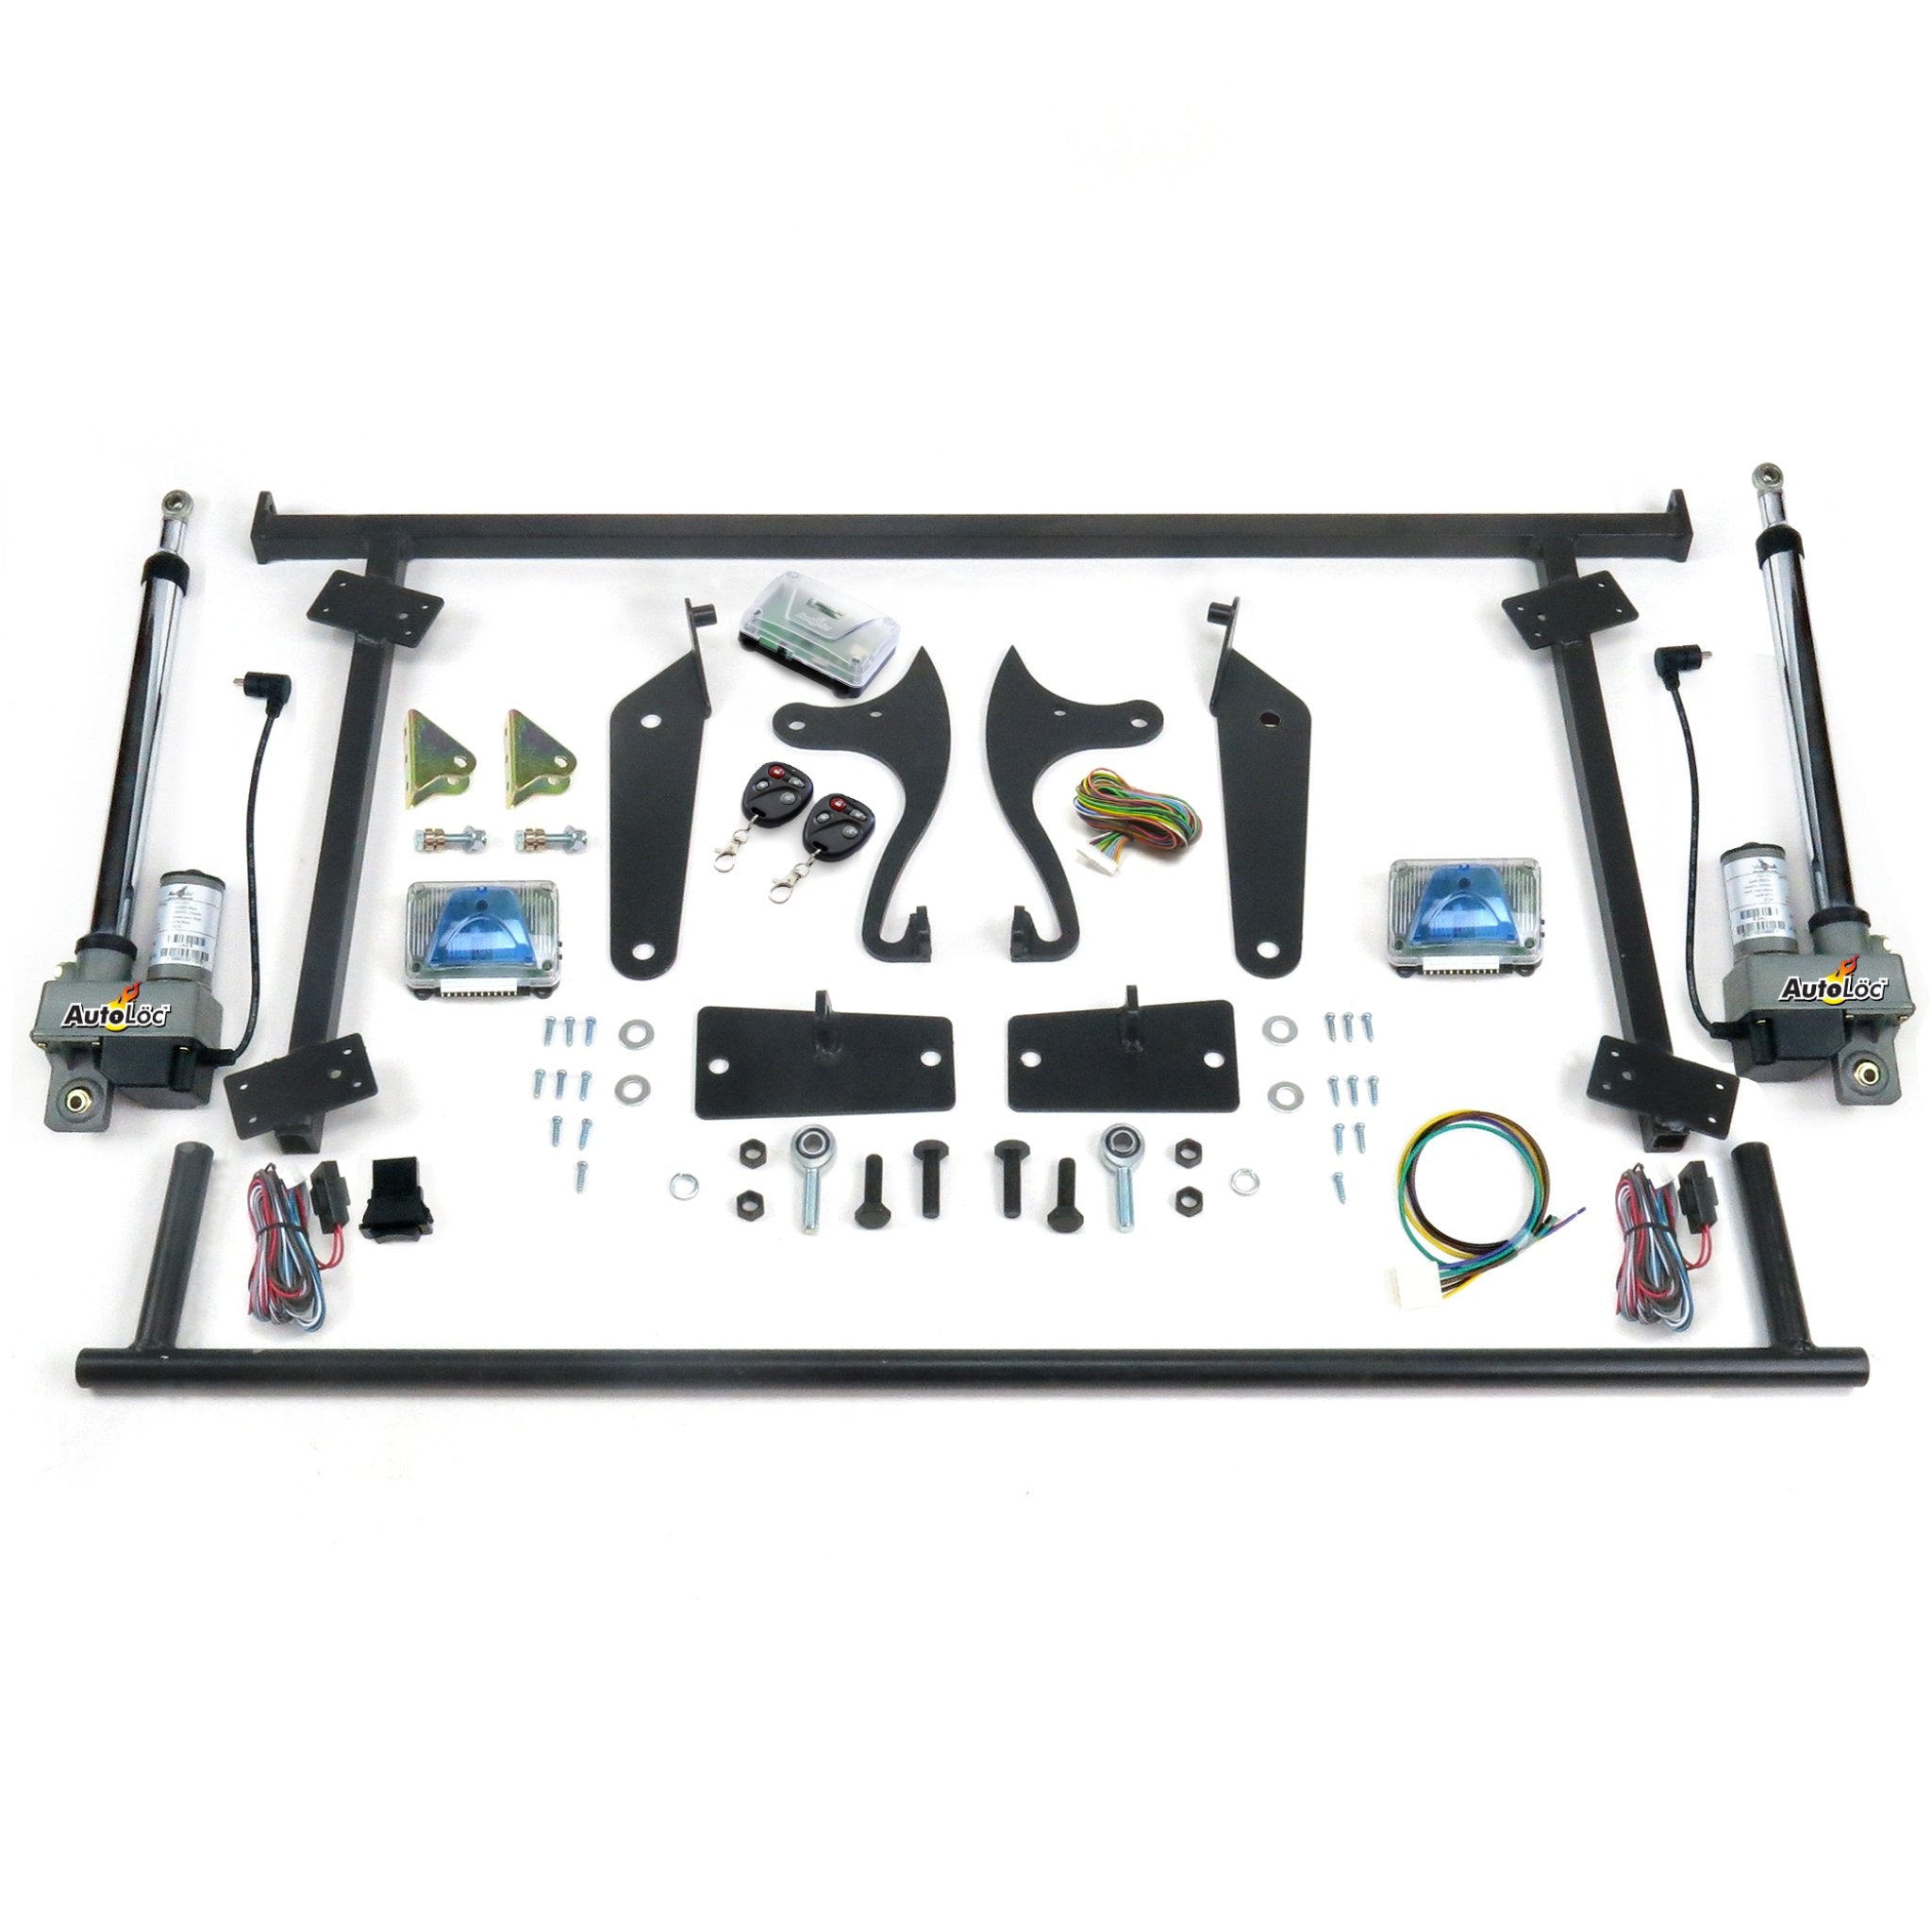 Universal Automated Power Tilt Hood Reverse Hinge Kit w/ Switch & Remote Control